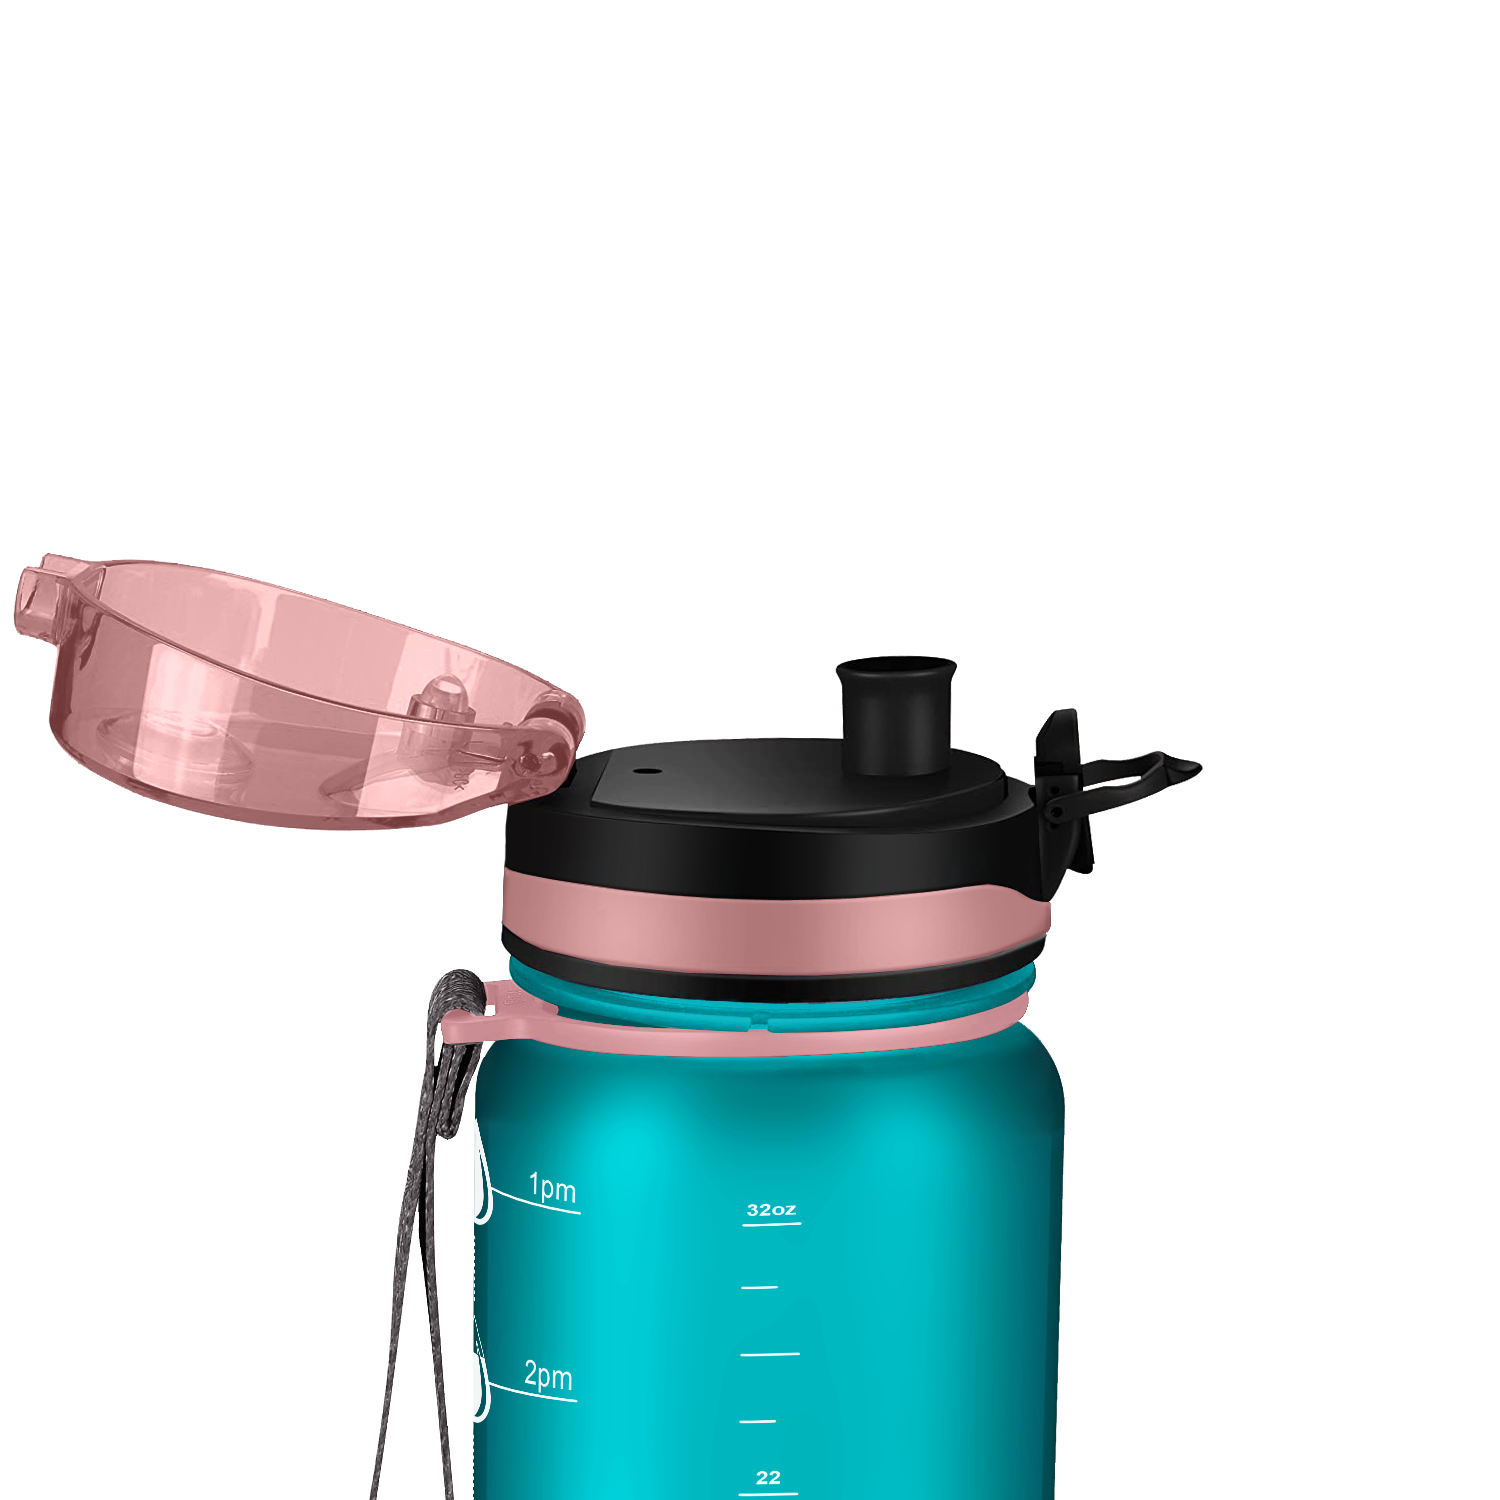 Personalized Water Bottles - Cuptify